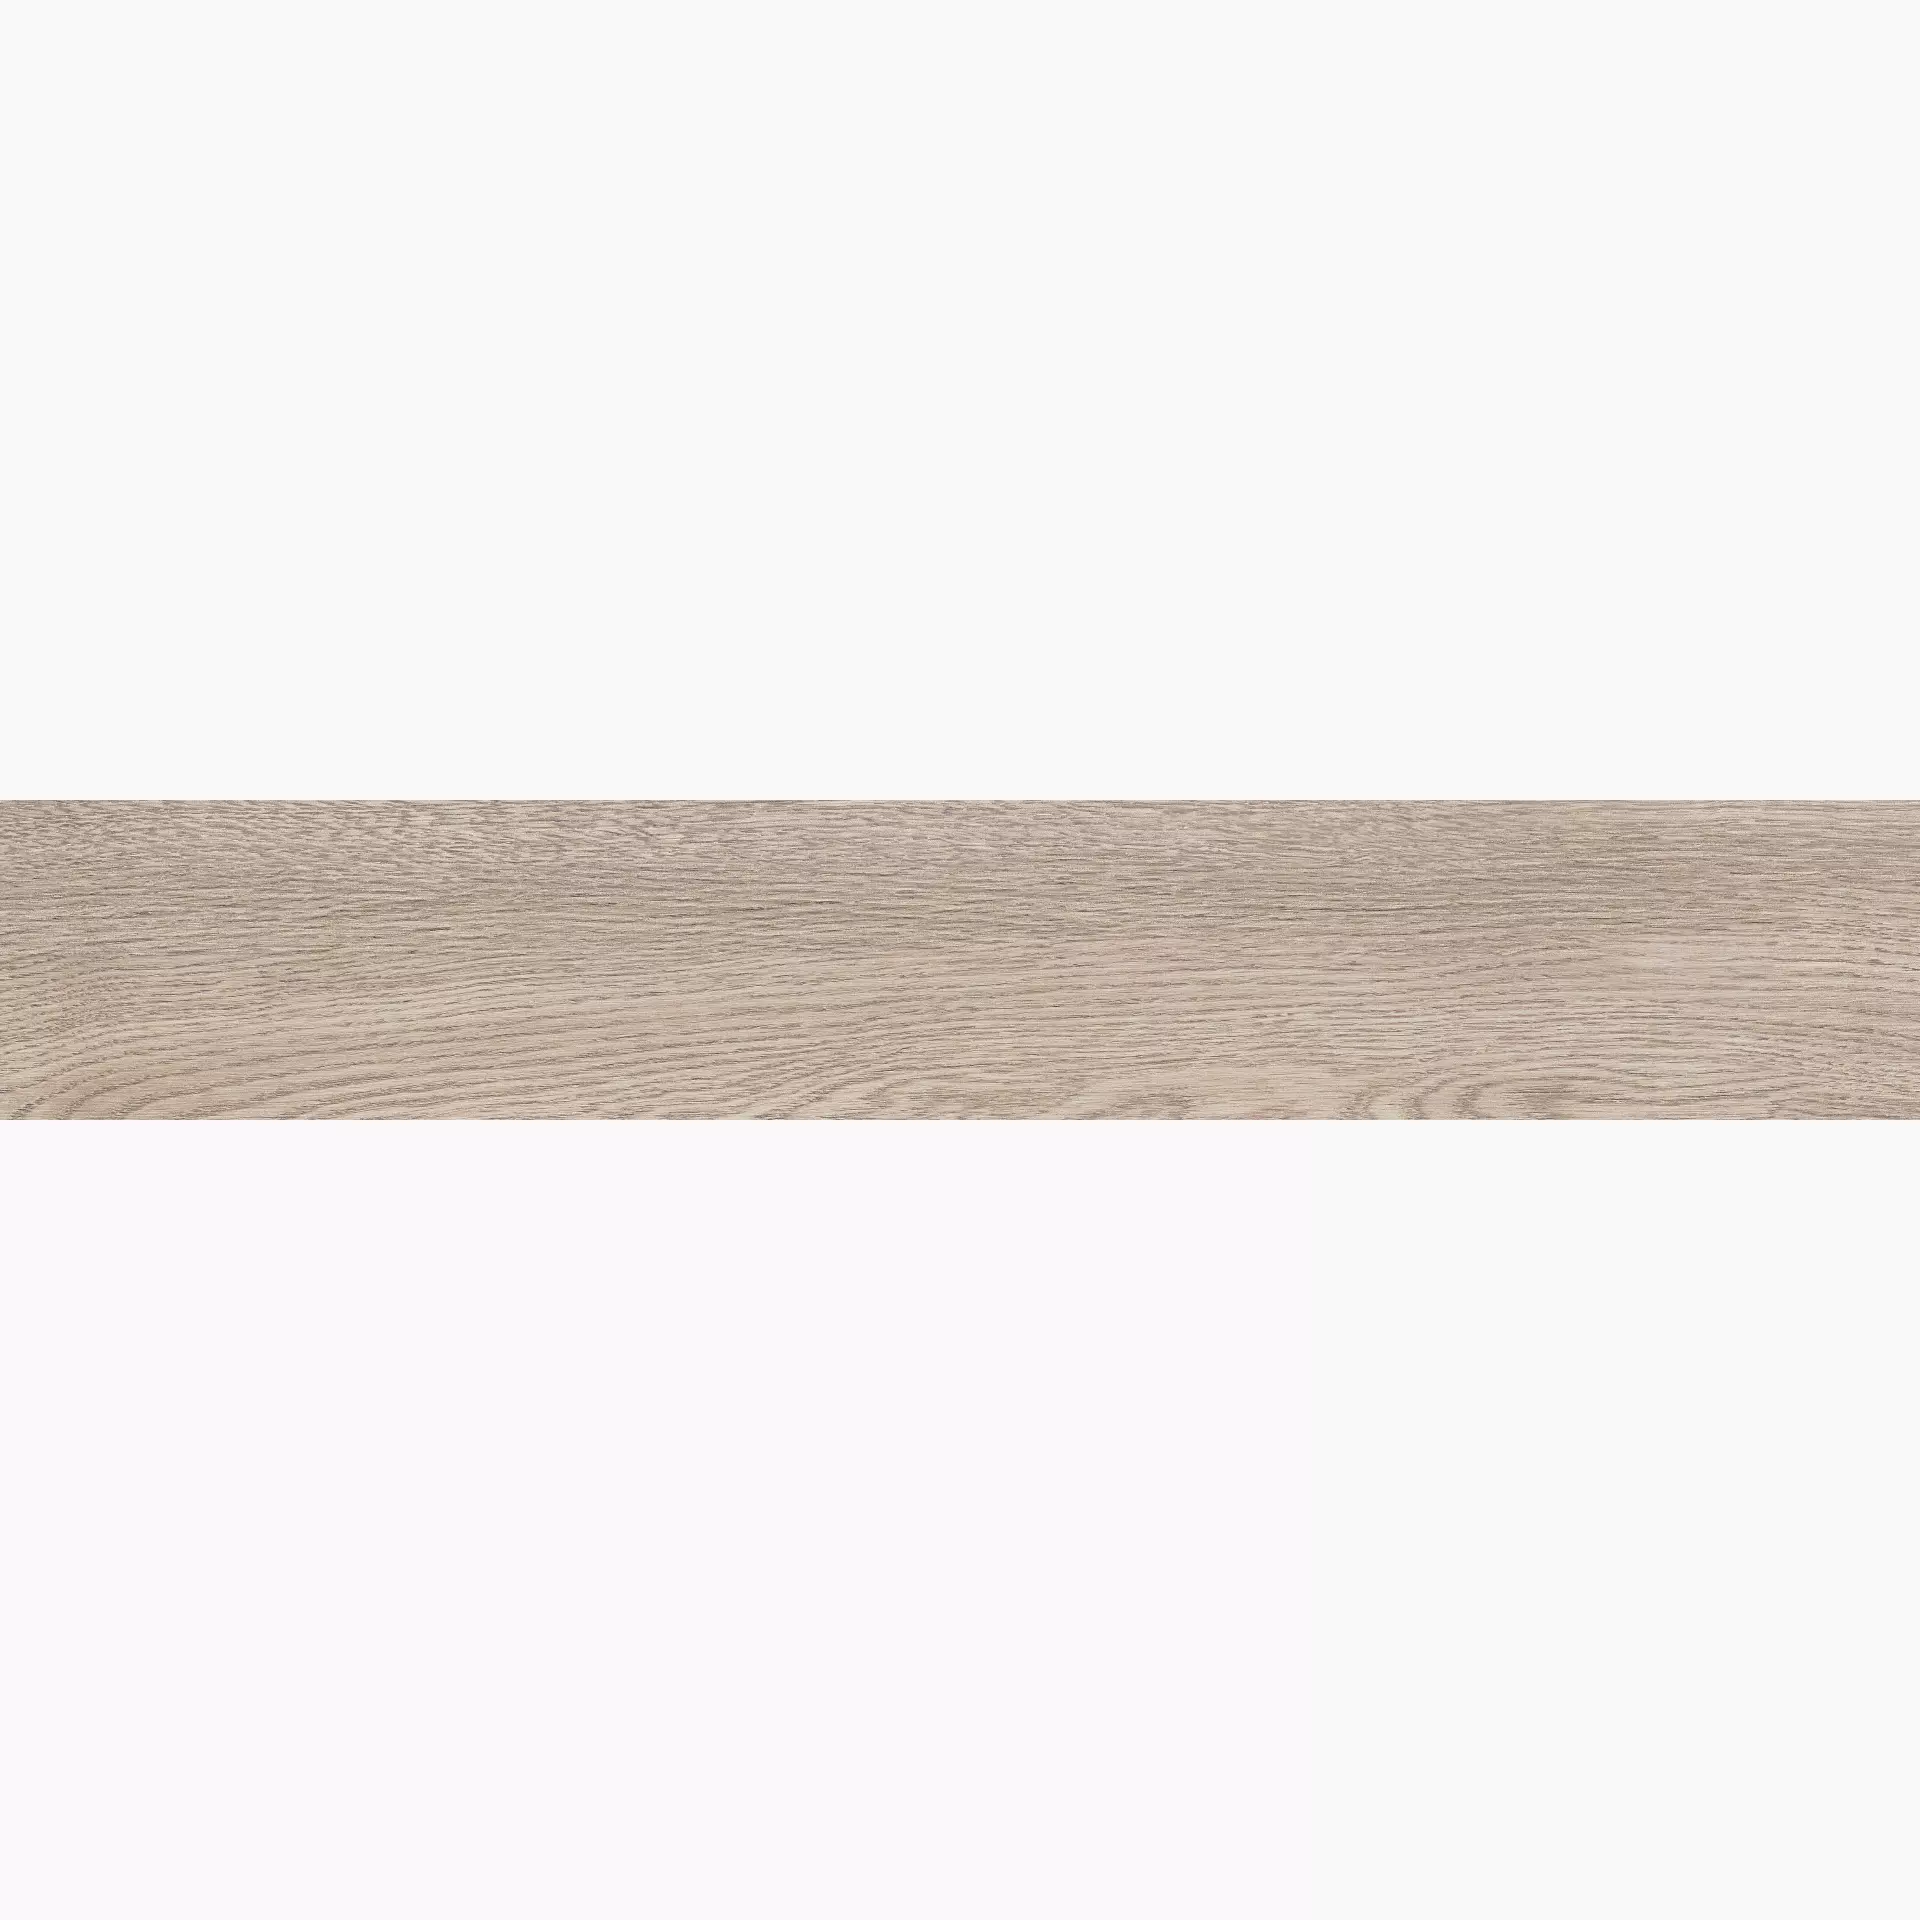 Flaviker Four Seasons Biscuit Naturale PF60011814 10x60cm rectified 8,5mm